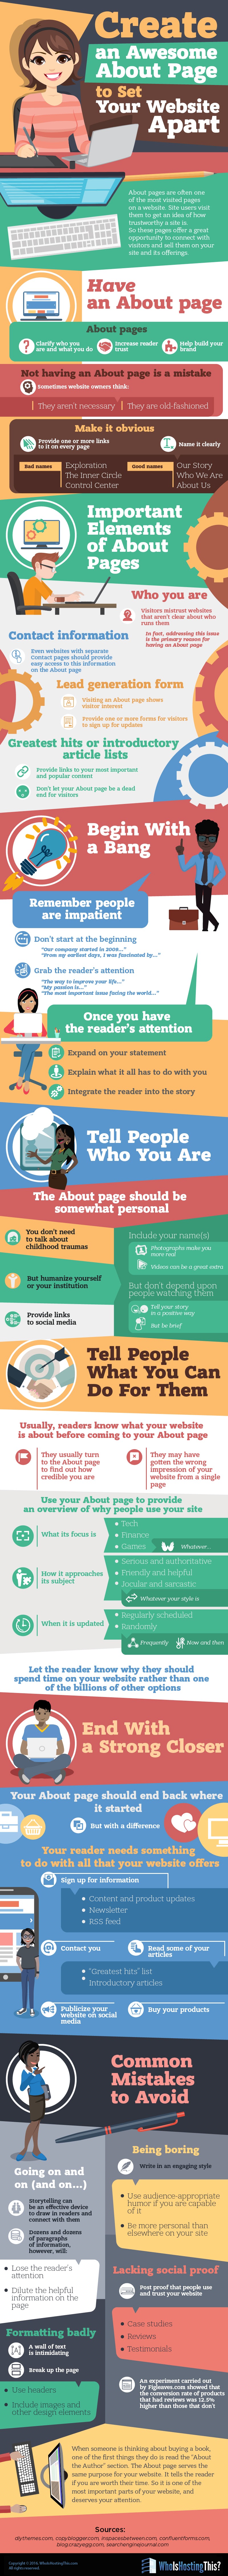 How to Create an Awesome About Page [infographic]